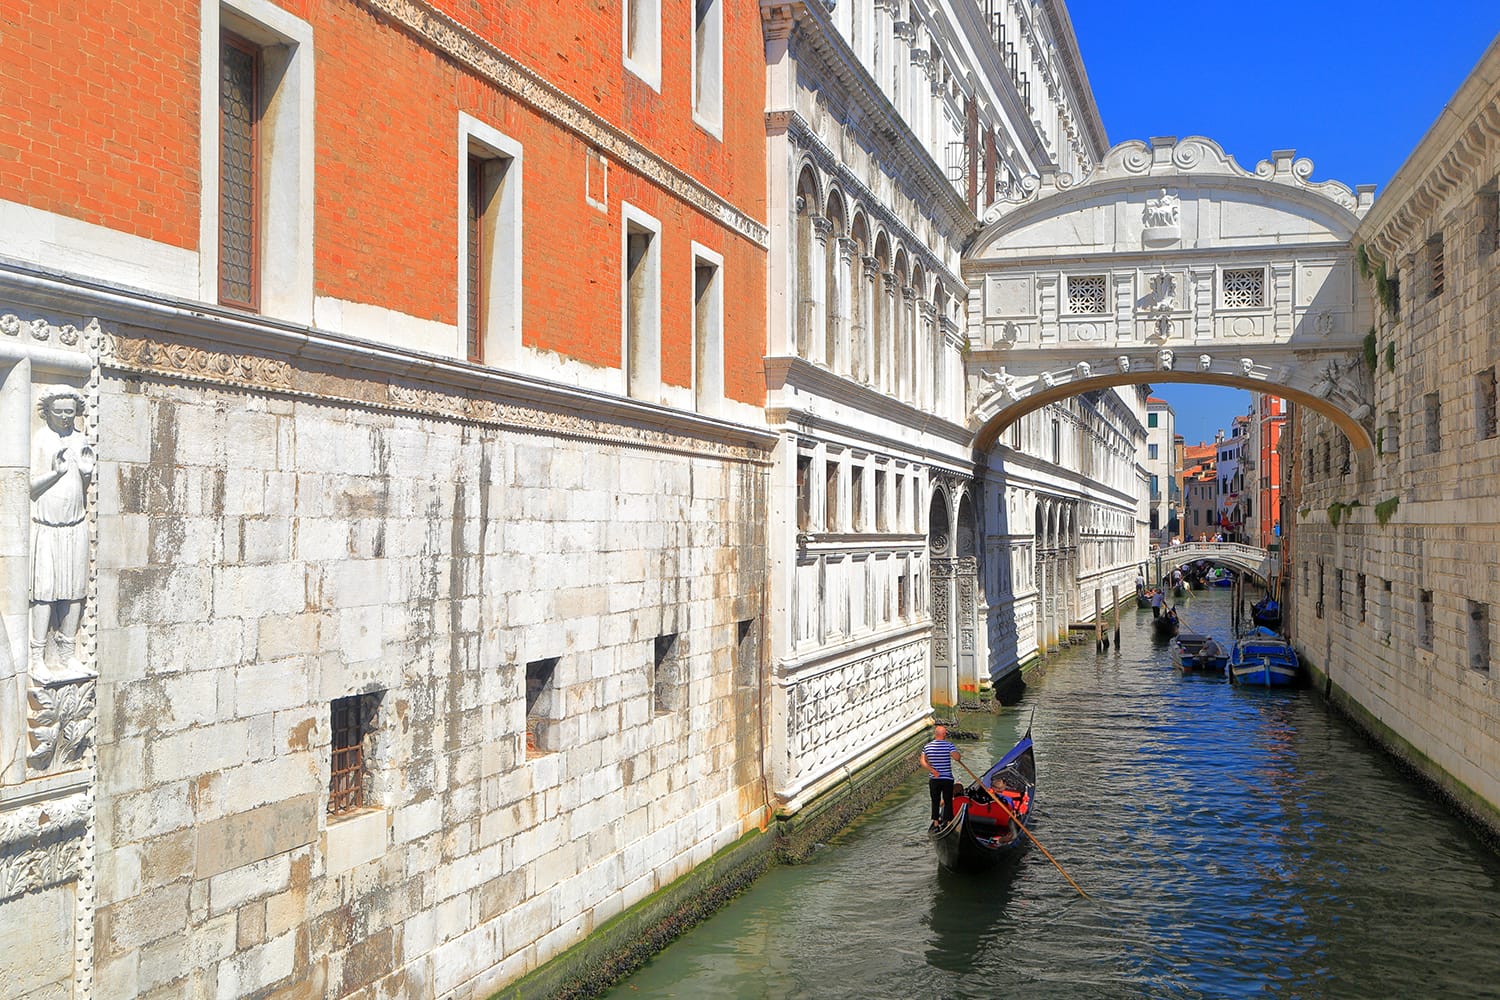 Bridge of Sighs (Ponte dei Sospiri) and the Doge's Palace (Palazzo Ducale) in Venice, Italy